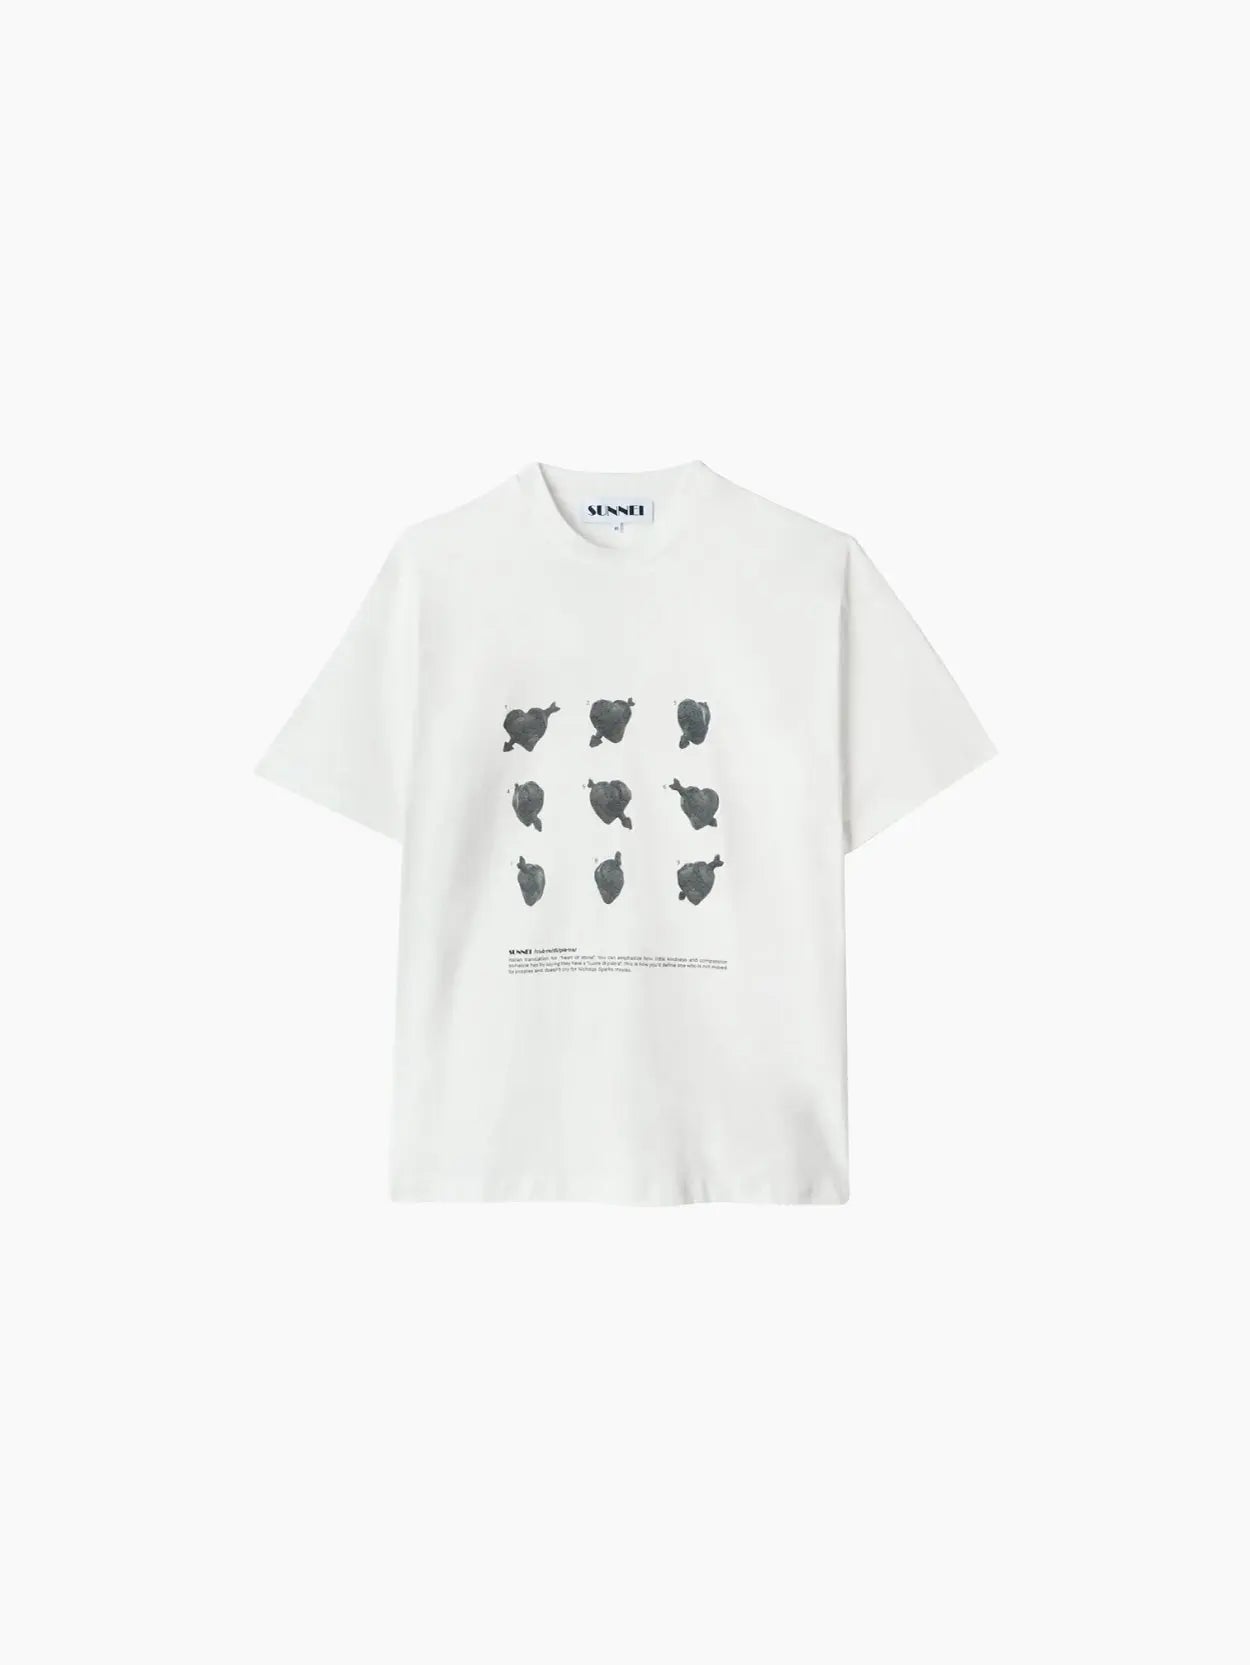 A white short-sleeved Classic T-Shirt "Cuori di Pietra" by Sunnei with a minimalist design featuring nine black abstract shapes arranged in a grid pattern on the front. There is text below the shapes. Available exclusively at Bassalstore, your go-to store in Barcelona.